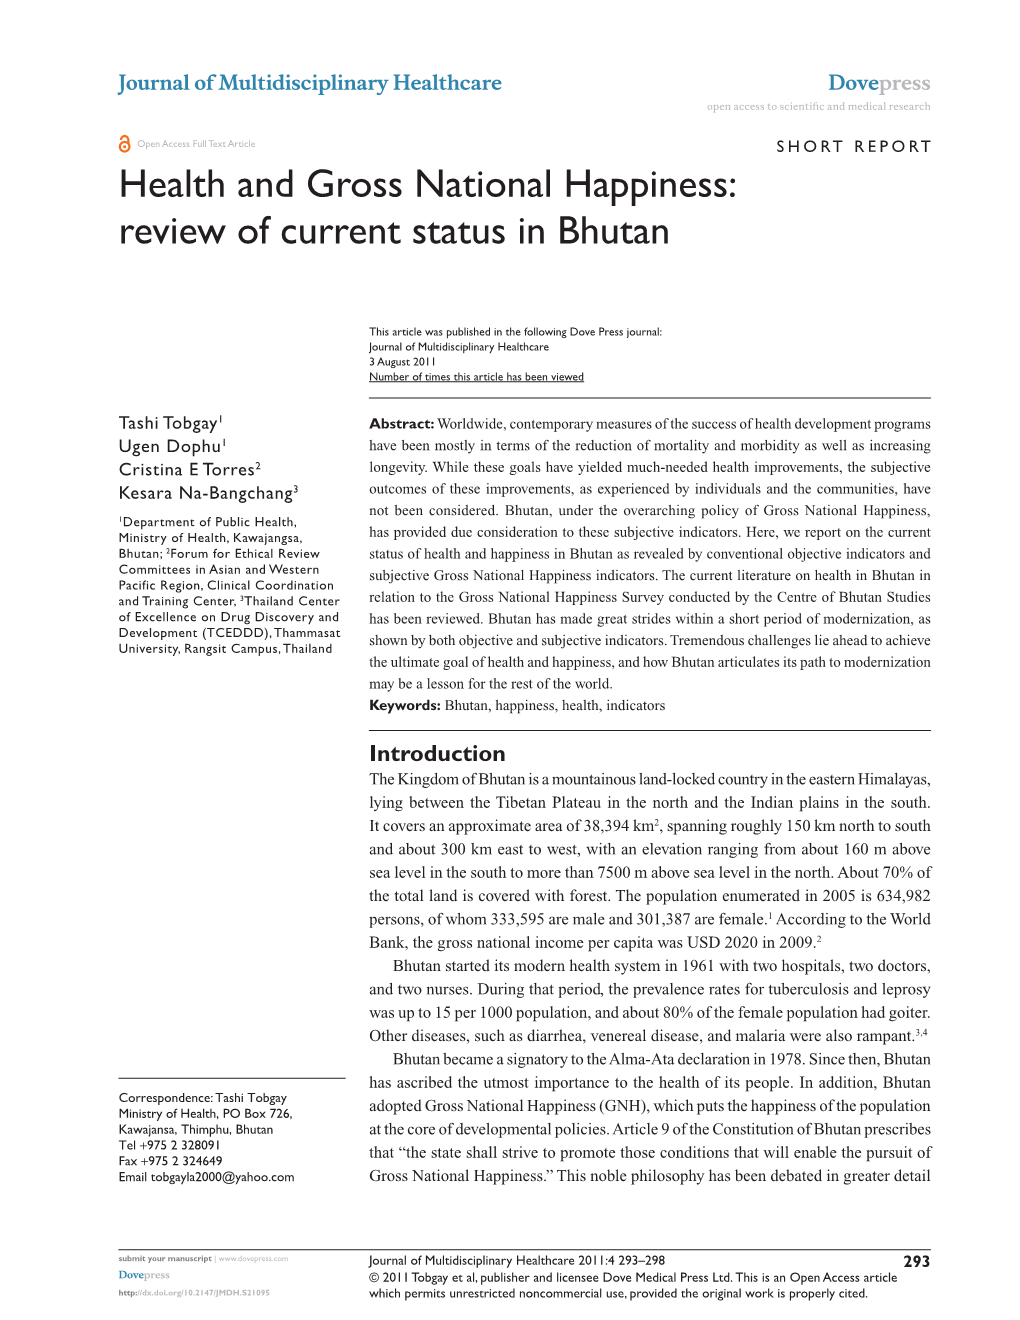 Health and Gross National Happiness: Review of Current Status in Bhutan